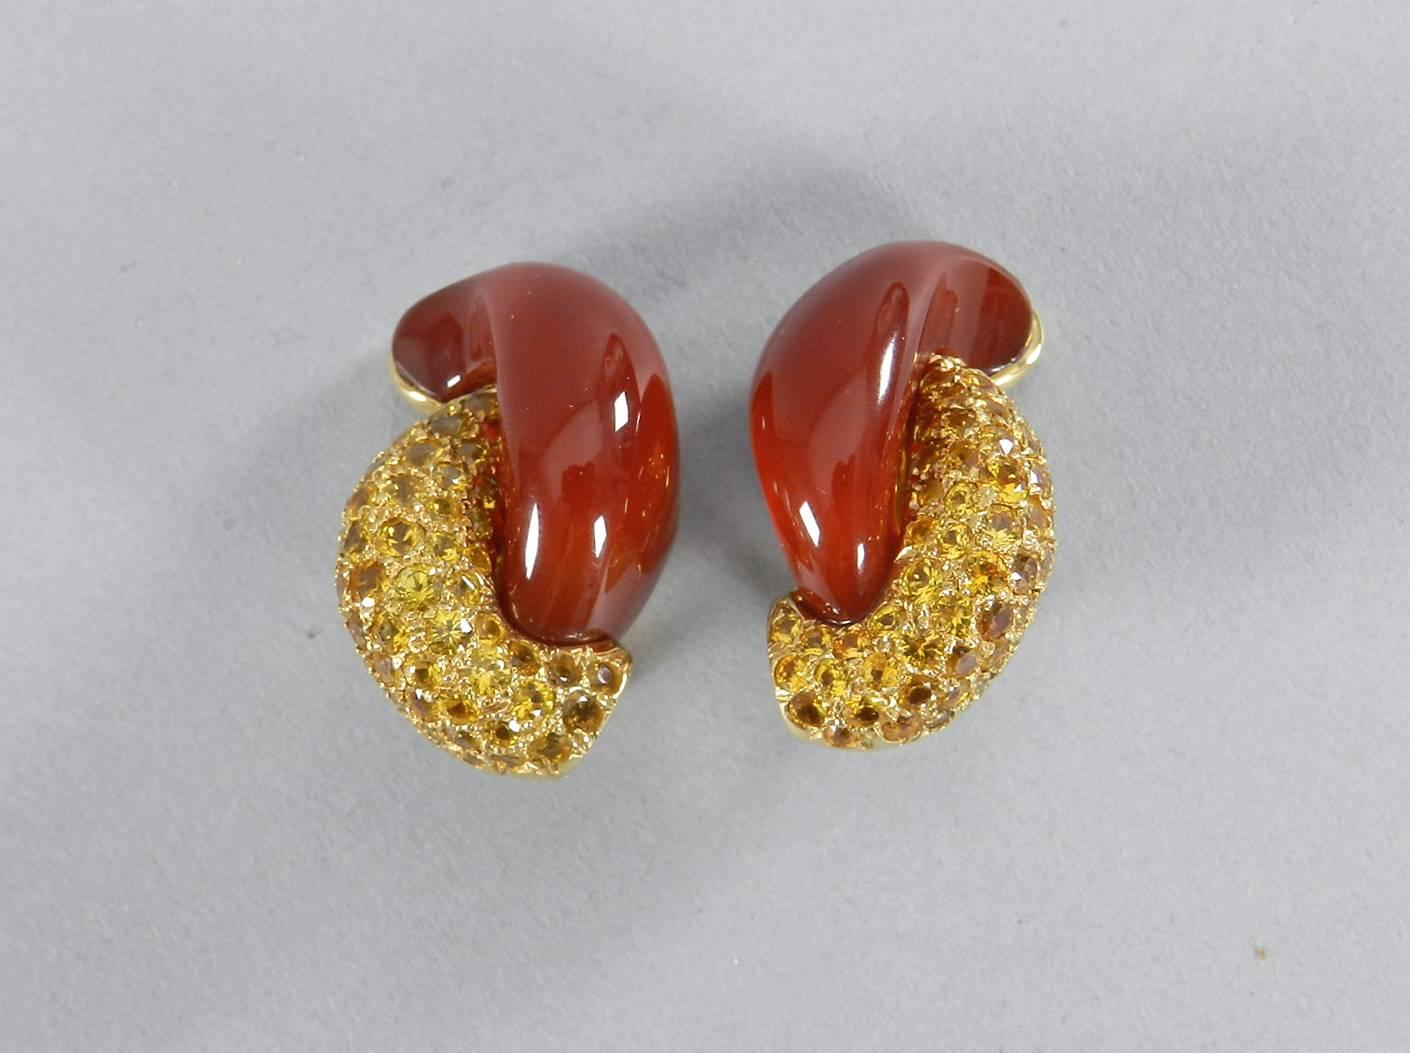 Seaman Schepps 18k yellow gold half link earrings. Clip design with carnelian and yellow sapphire. Hallmarked (c) Seaman Schepps 750. Measures about 1.25" x 0.75". Total weight 250 grams. 

We ship Worldwide.